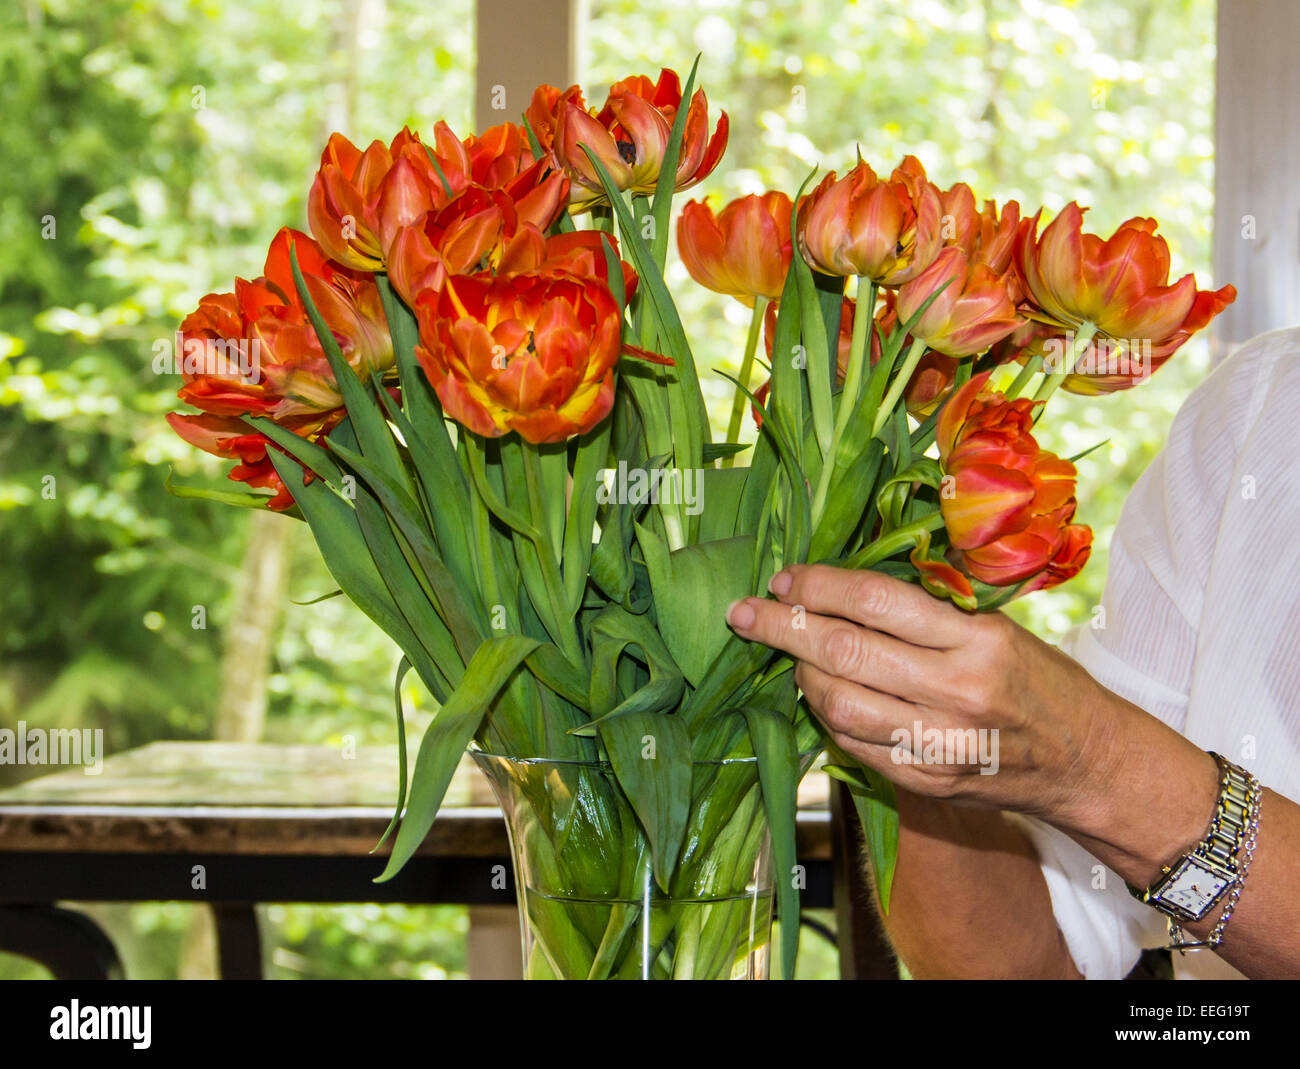 Woman arranging a bouquet of red and yellow fresh tulips in a clear glass vase. Stock Photo